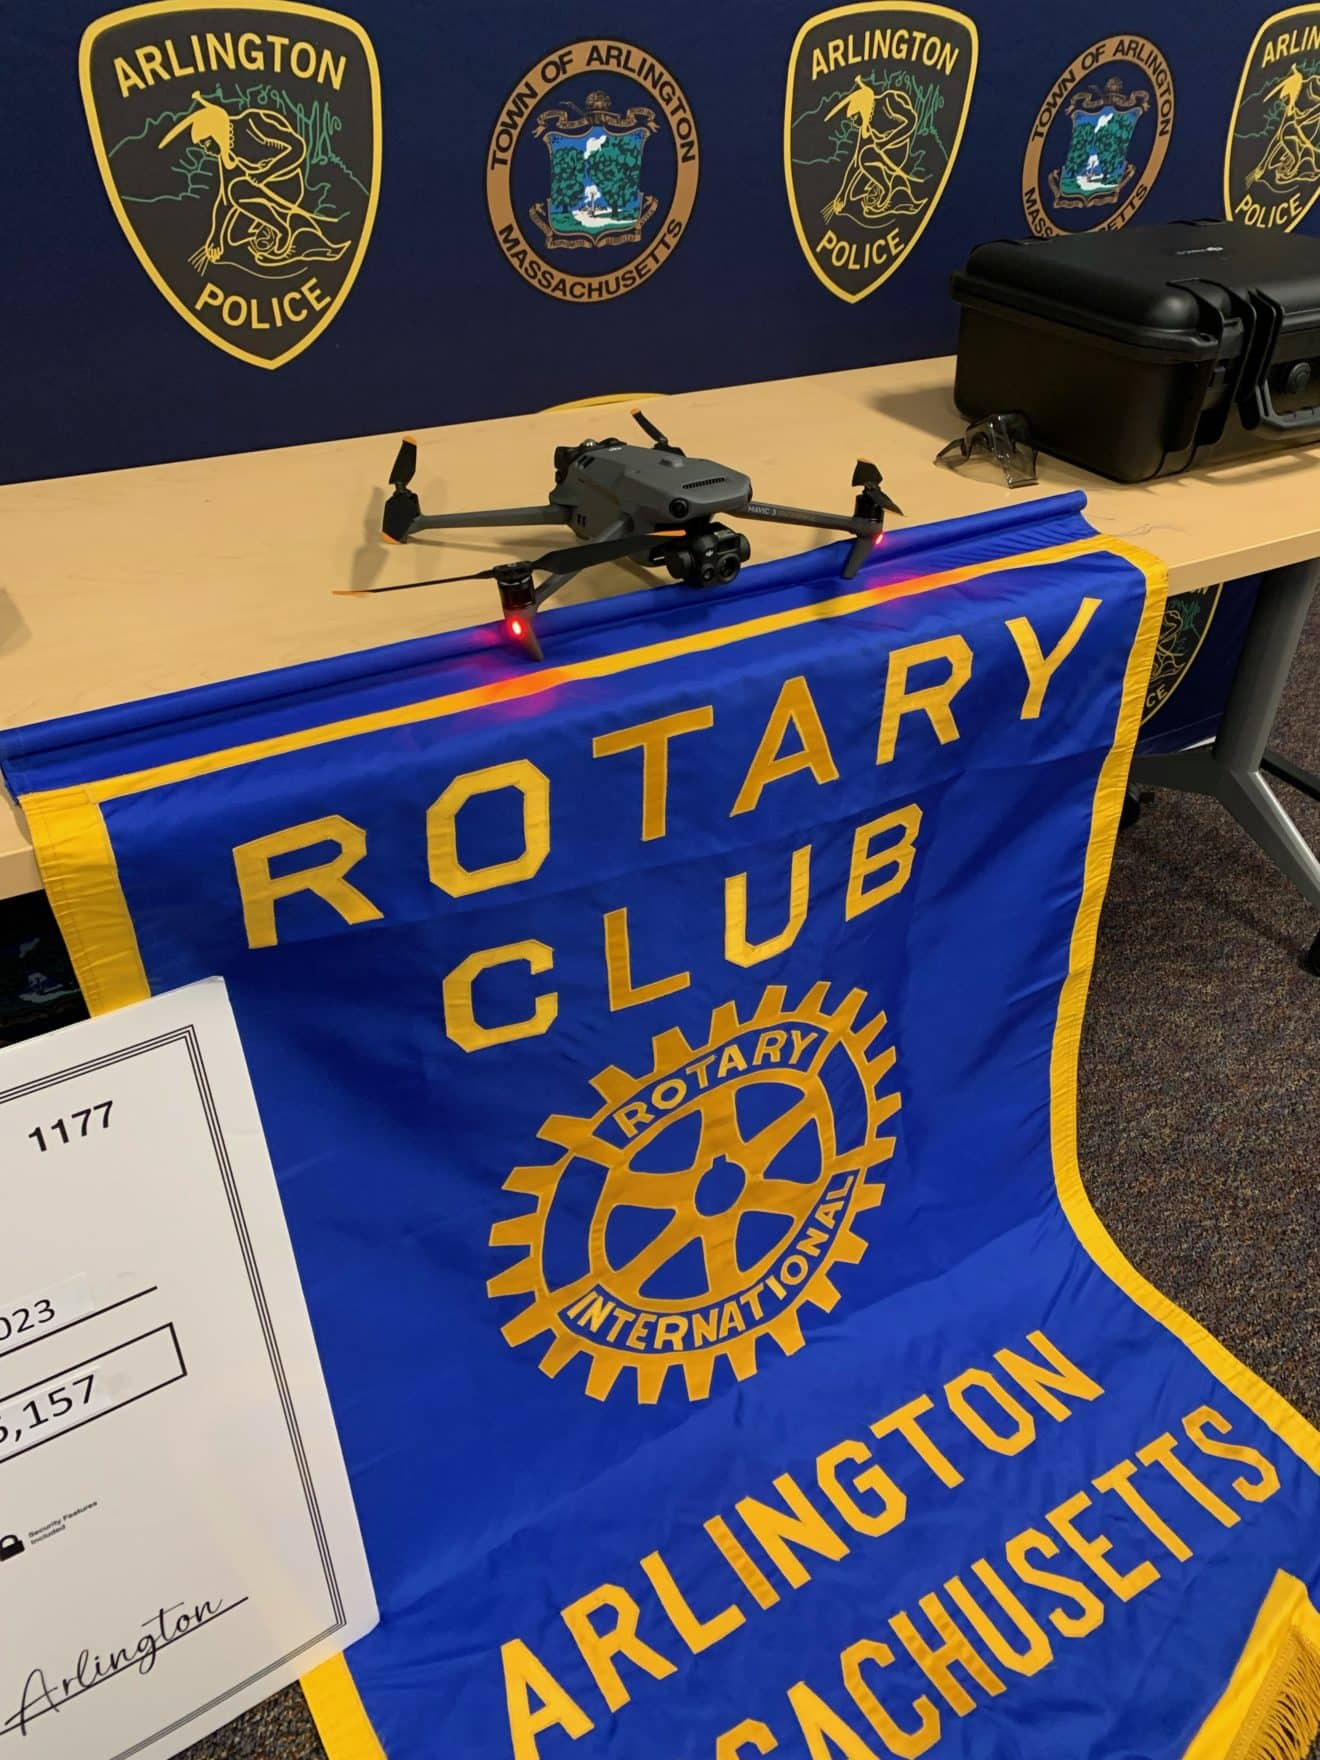 The drone will be used by officers for emergency calls for service such as water or ice rescues and to search for missing persons, as well as at community events. / APD photo